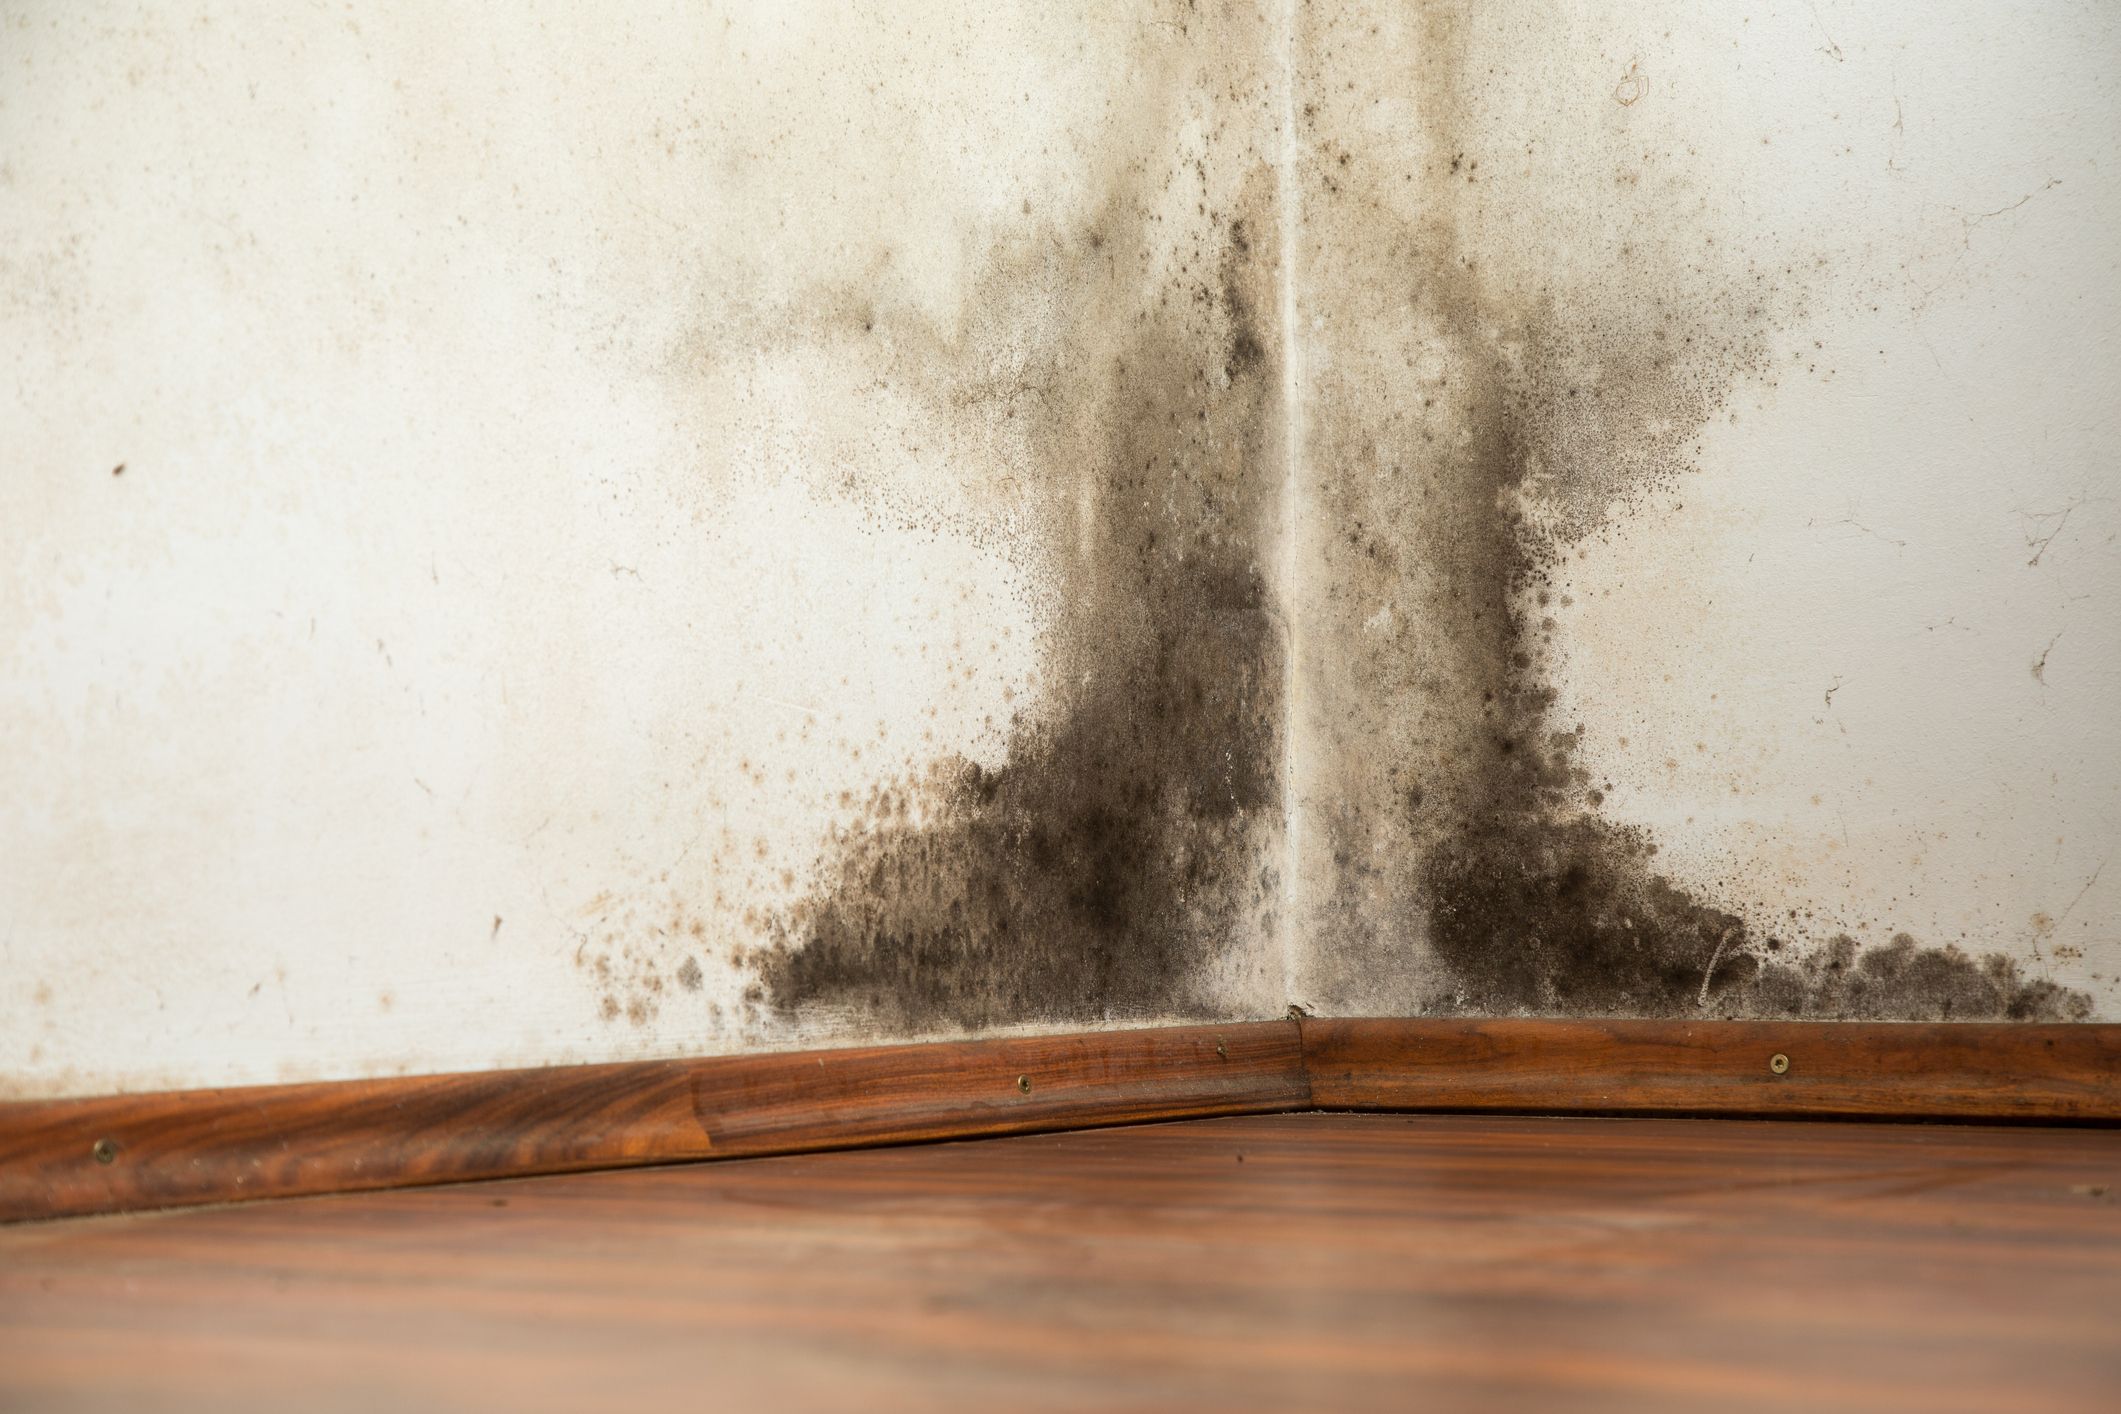 How to Get Rid of Black Mold - The Home Depot